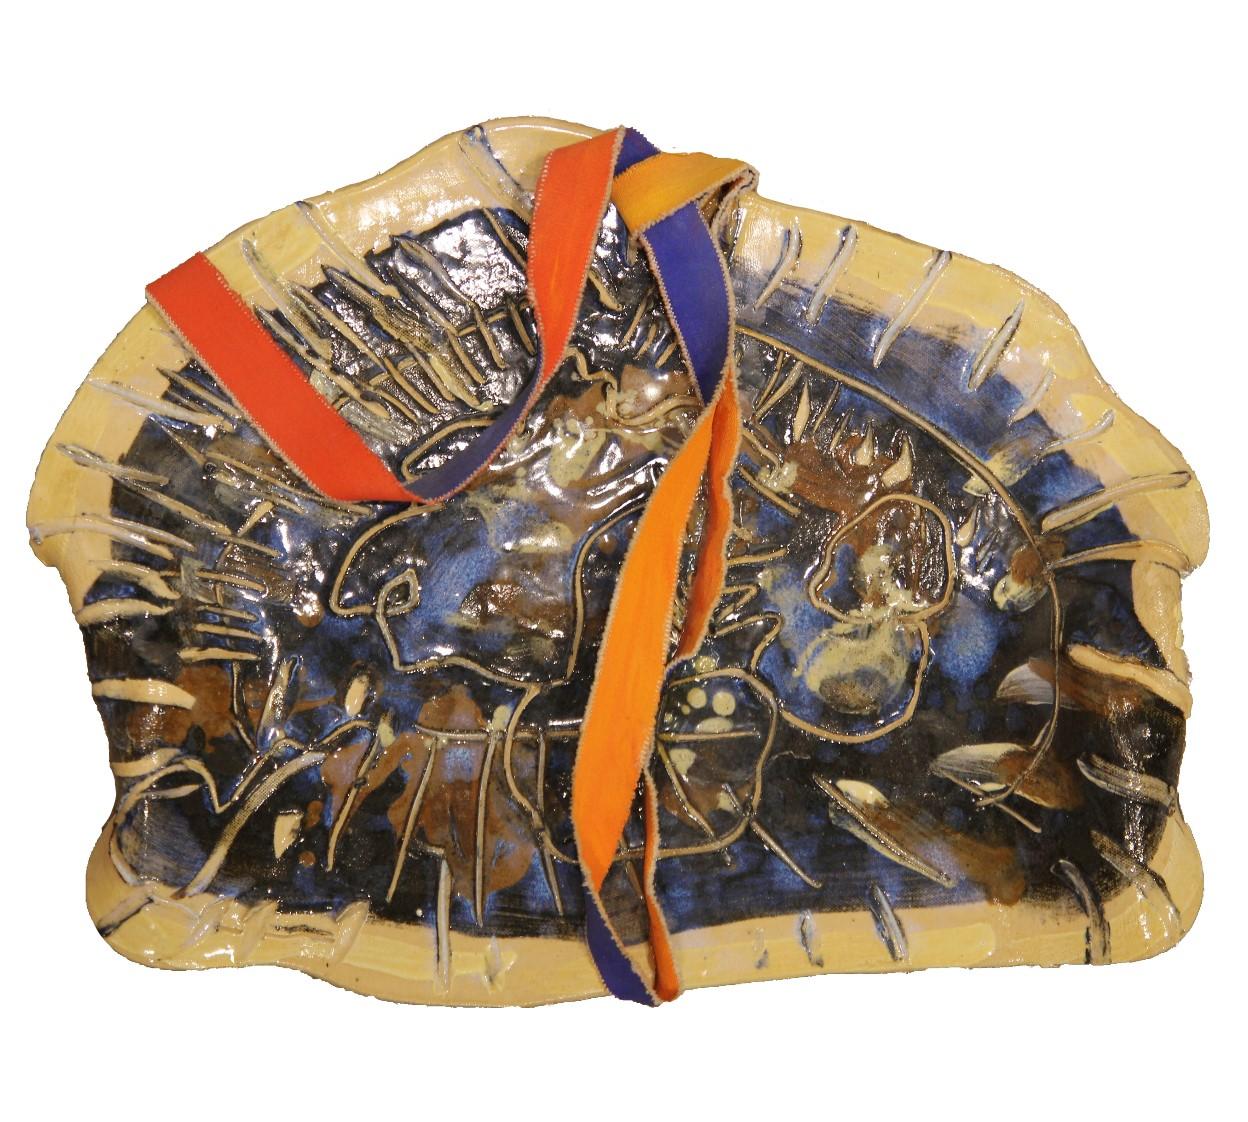 Untitled Blue Ceramic Dish with Fabric - Sculpture by Charles Schorre